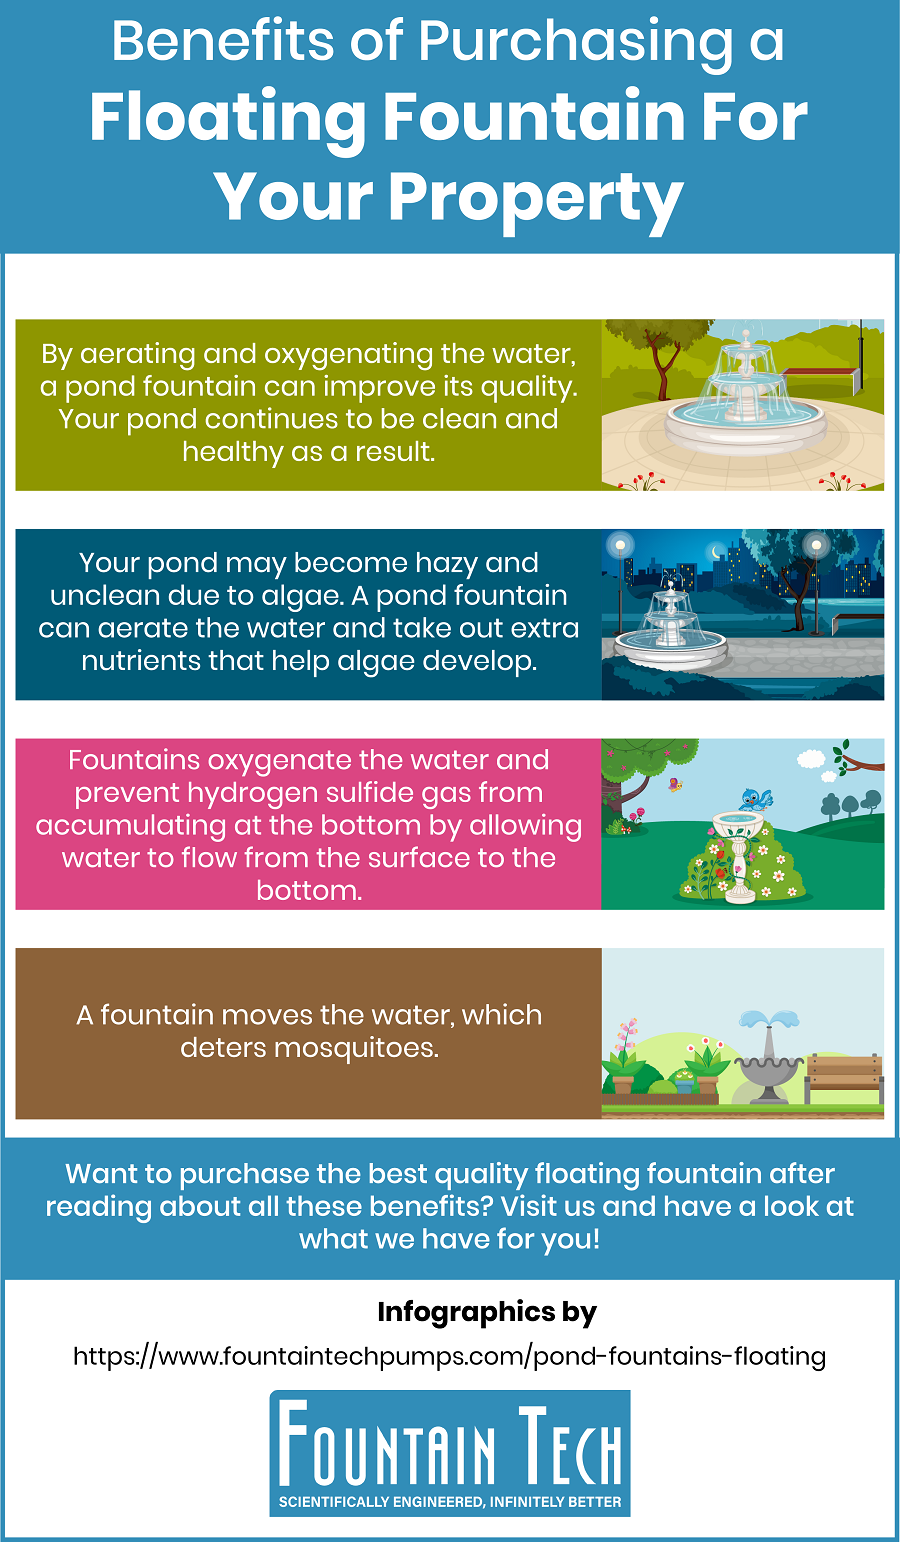 Benefits of Purchasing a Floating Fountain